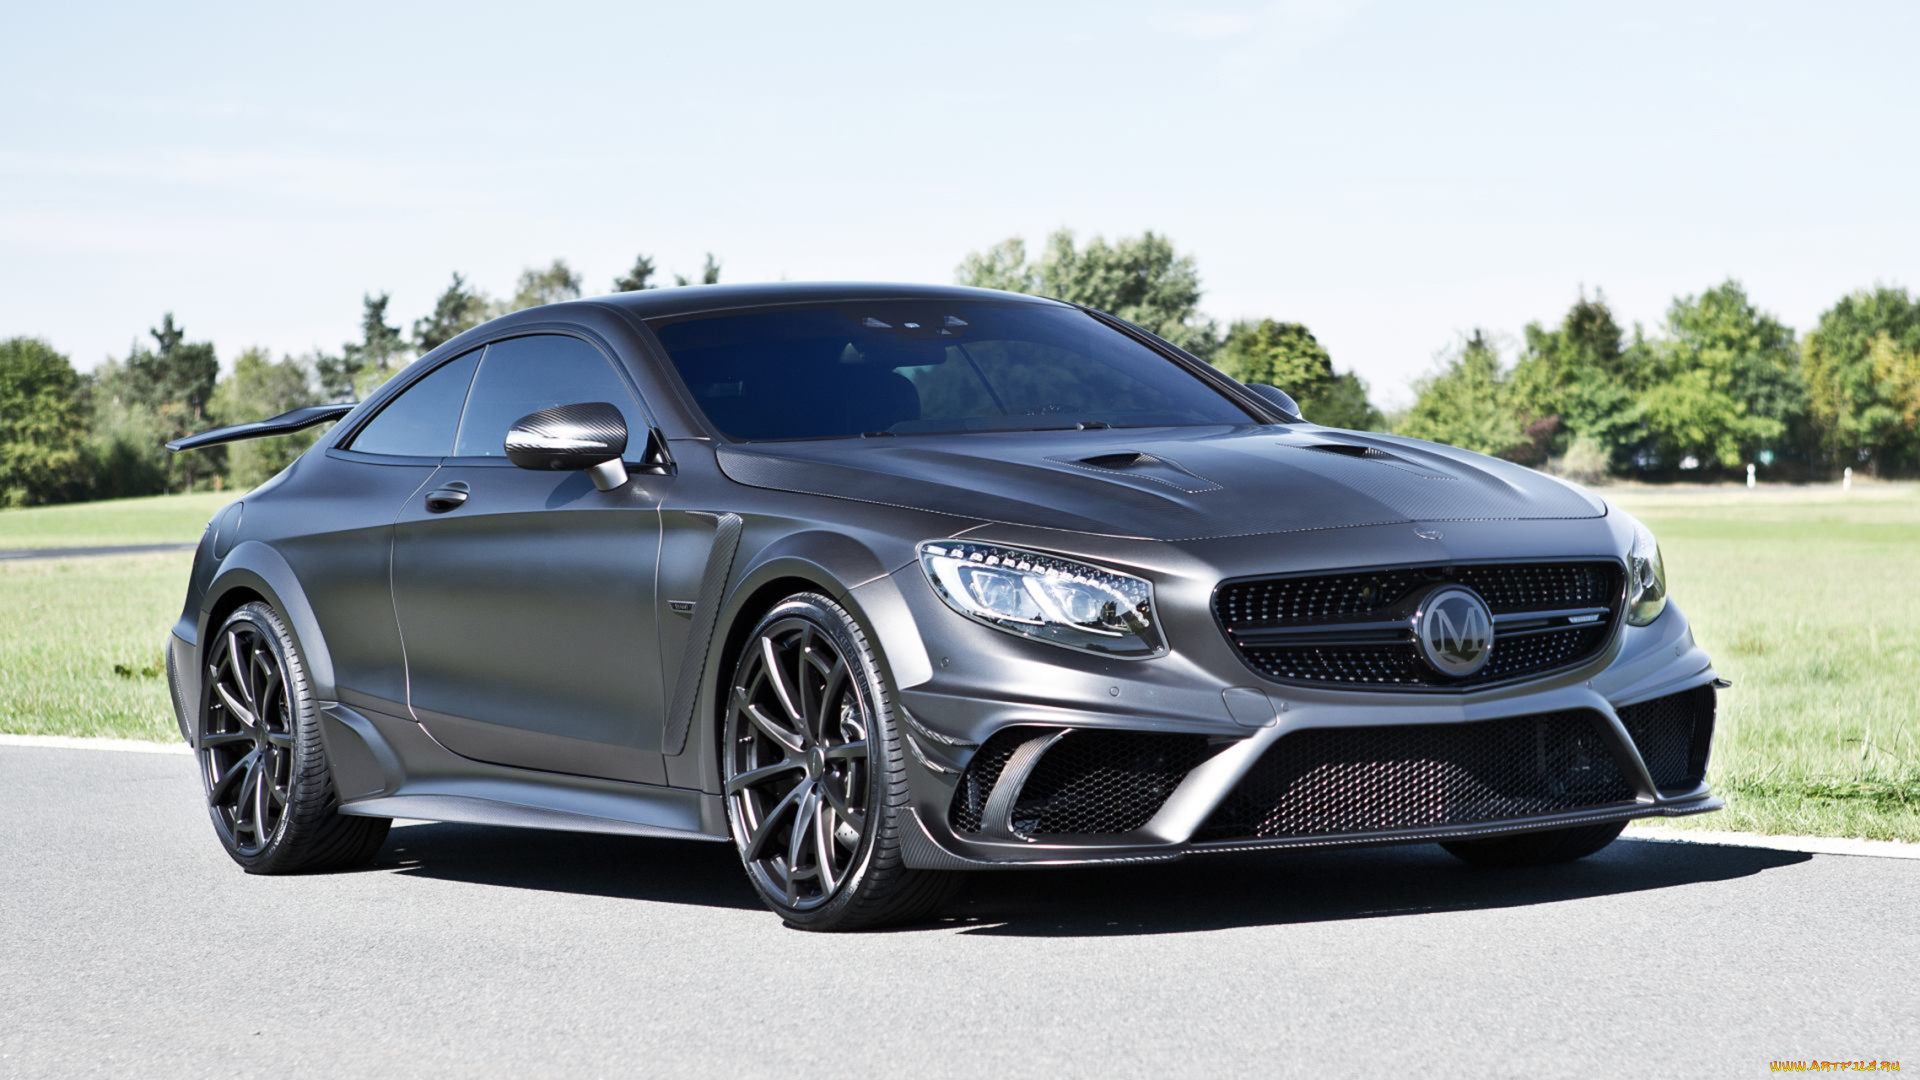 mansory, mercede-benzs, s63, amg, coupe, black, edition, 2015, автомобили, mercedes-benz, mansory, s63, amg, coupe, black, edition, 2015